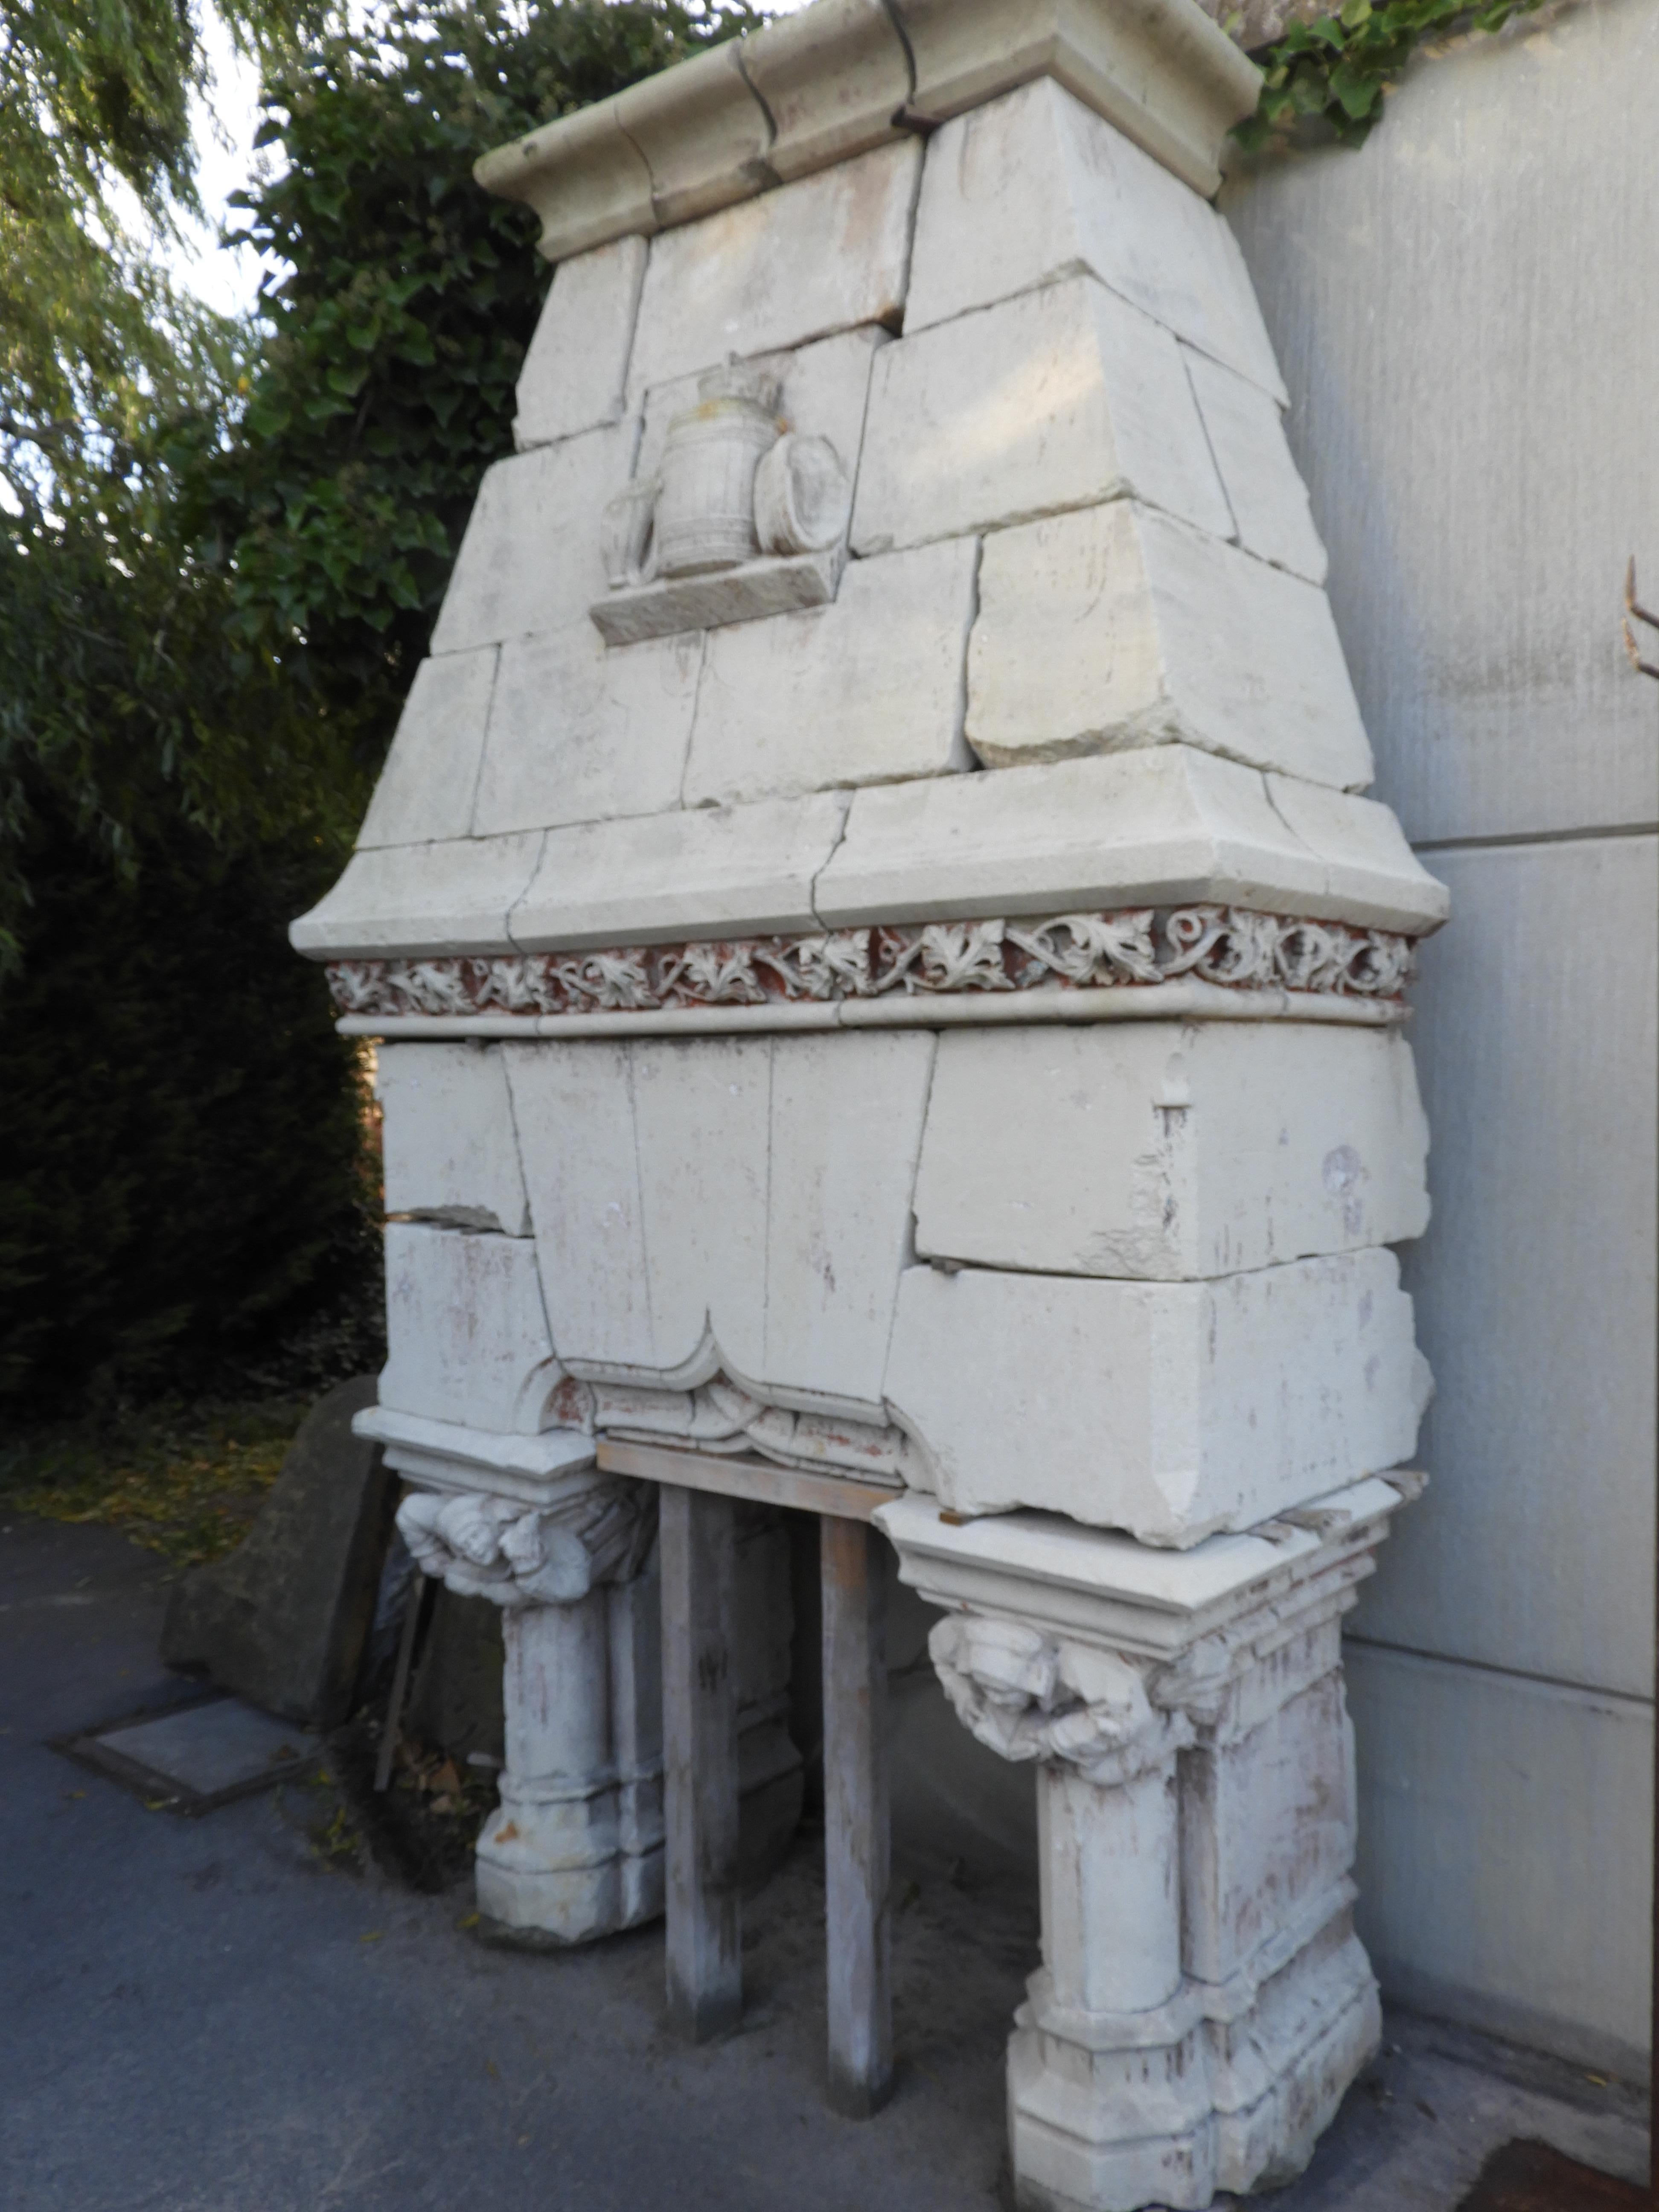 19th century neo gothic decorative fireplace in French limestone .
The interior size is 80 cm wide x 90 cm high .